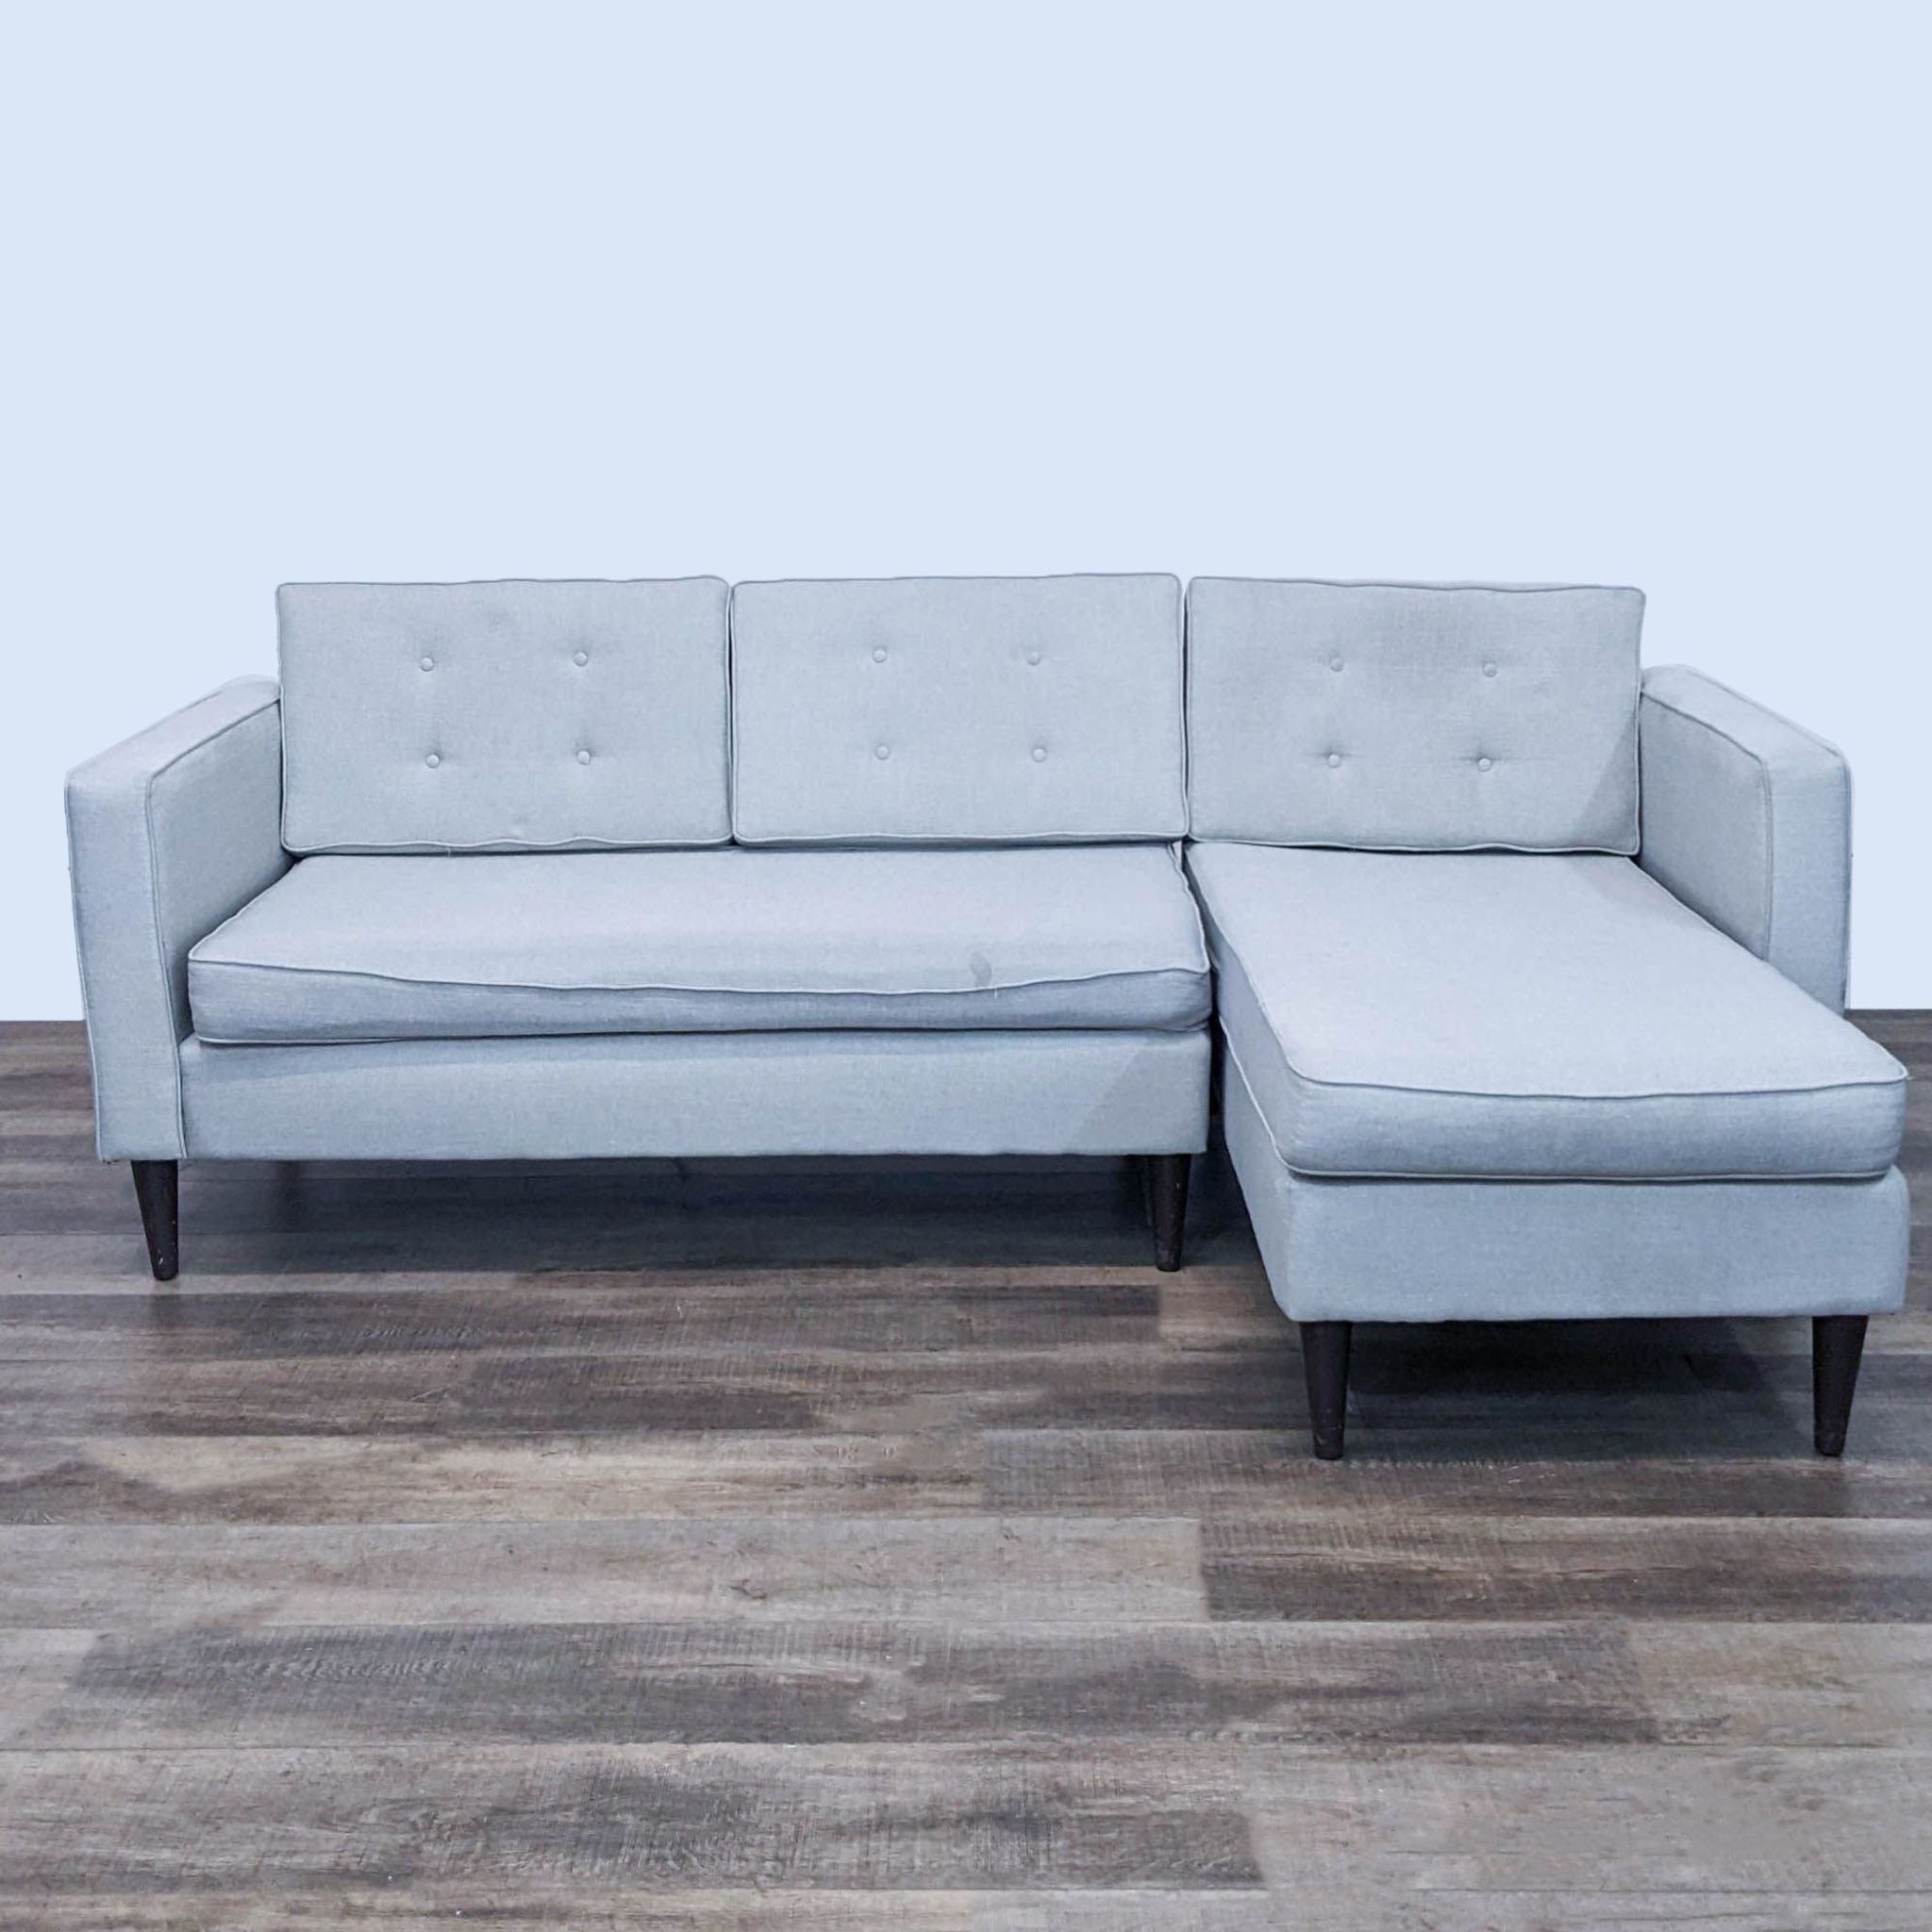 Reperch brand two-piece sectional sofa with tufted back, narrow arms, and tapered legs on a wooden floor.